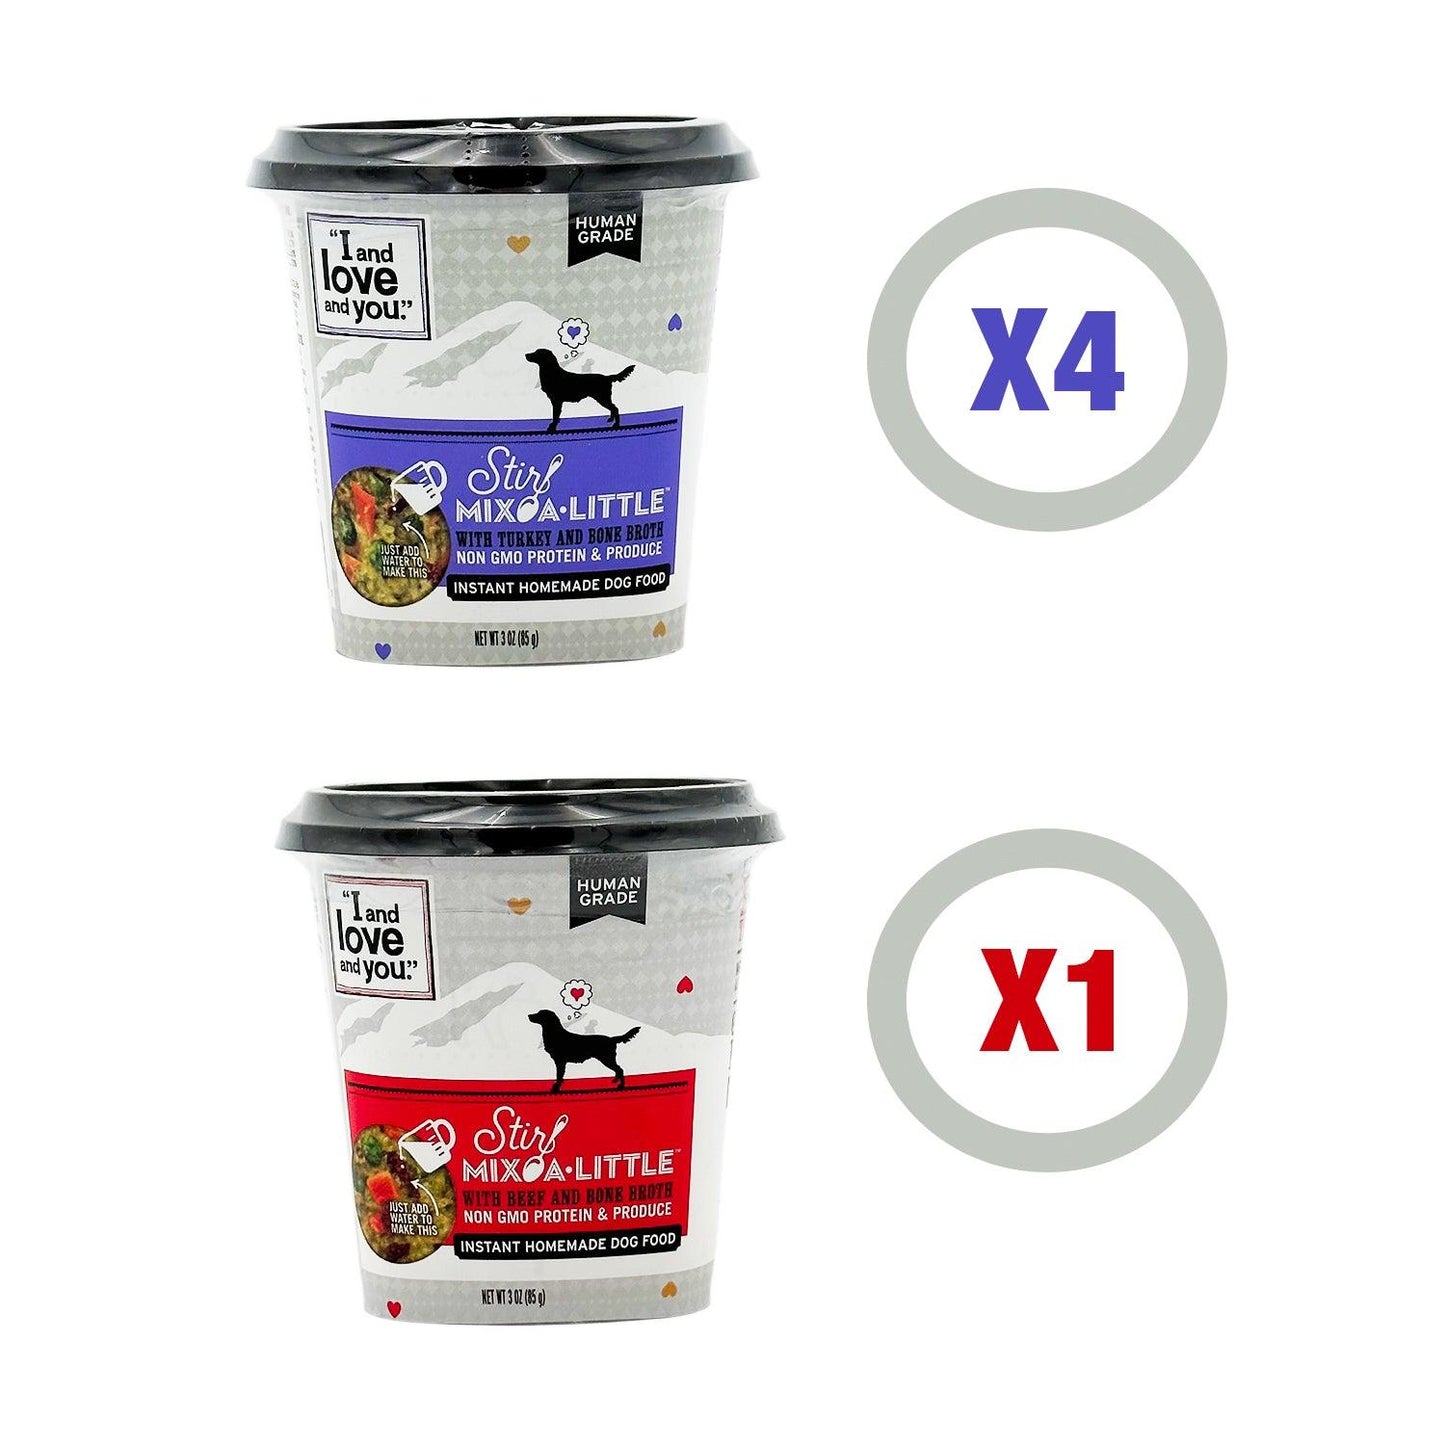 i and love and you | stir mix a little instant dog food | 5 ct | BEST BY 08/22 - Home Revival Shop